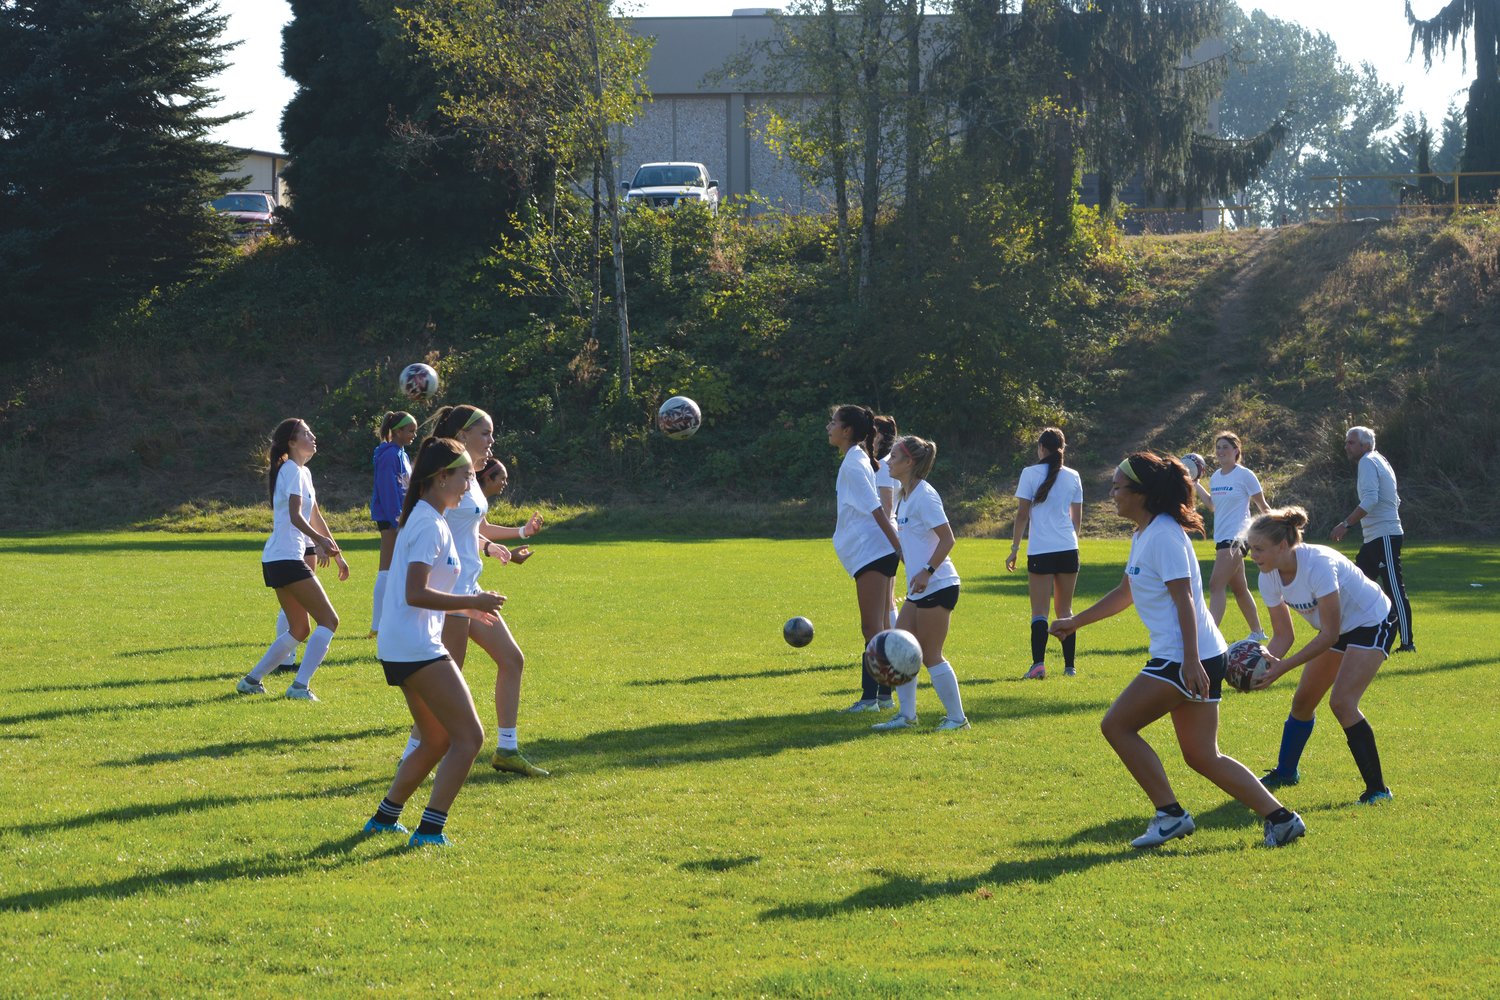 Players from the Ridgefield Spudders girls soccer team toss the ball to each other on Oct. 5.